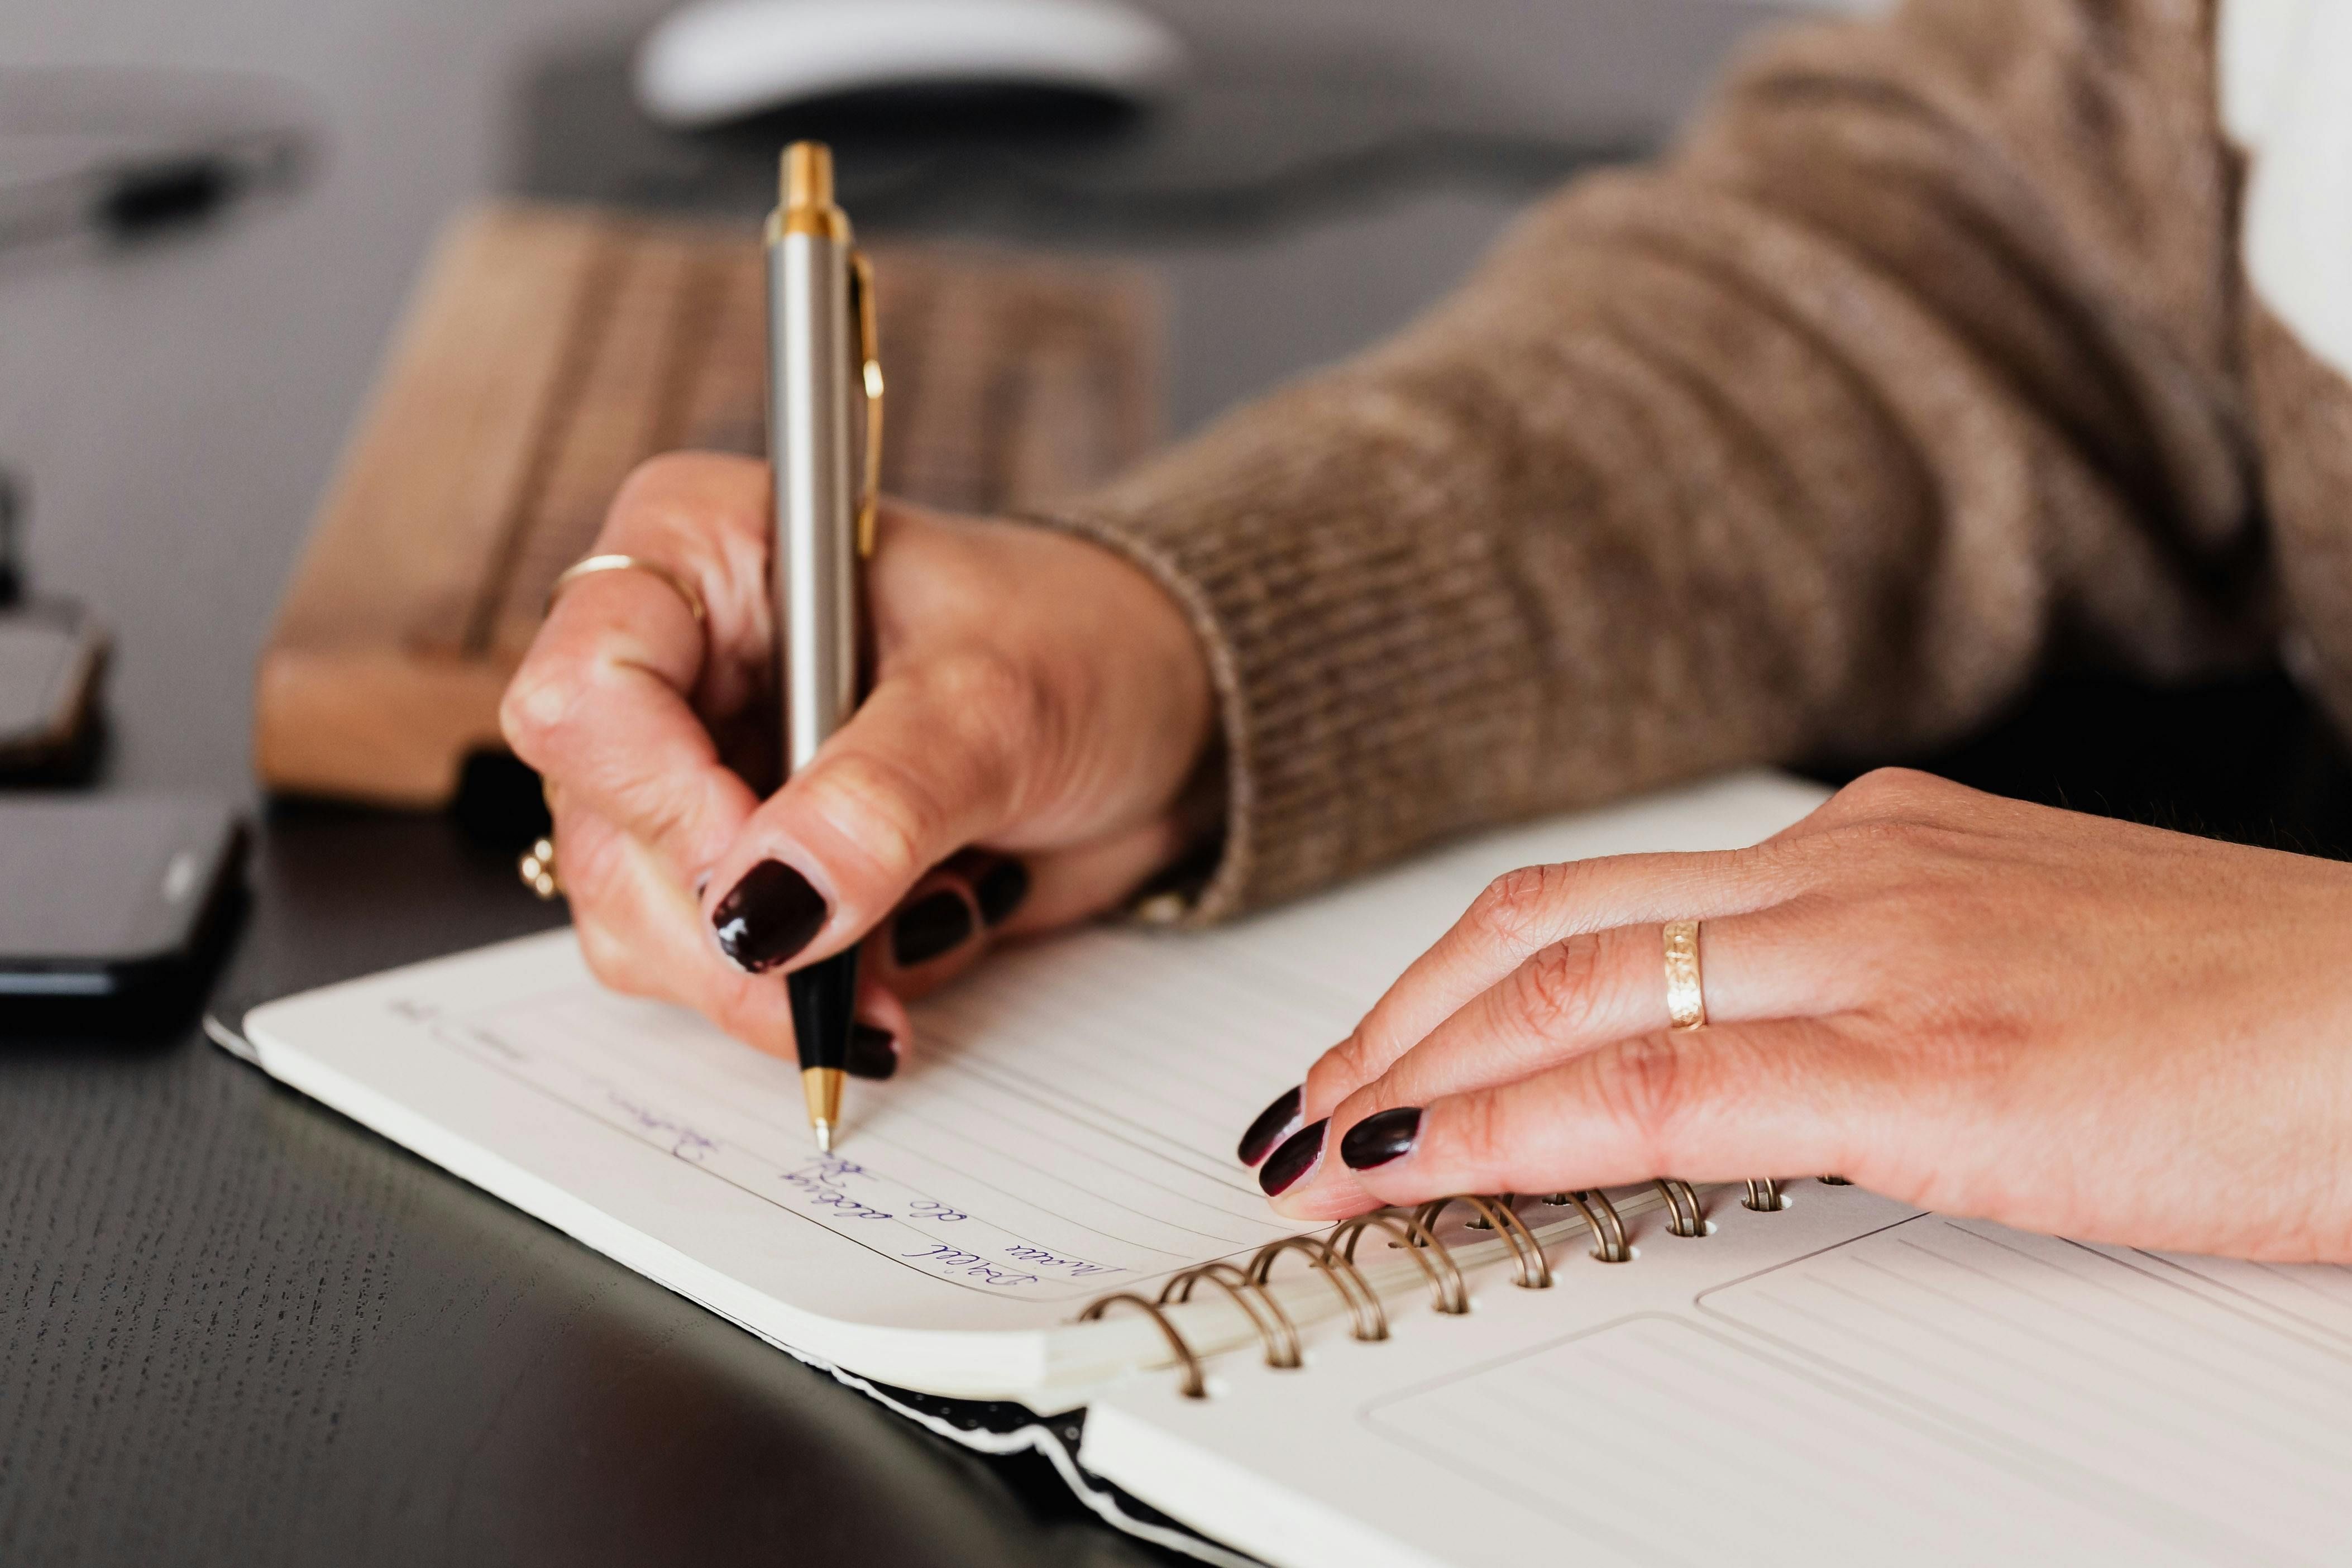 A woman journaling while intermittent fasting and taking antidepressants, symbolizing the importance of self-awareness and open communication with healthcare providers